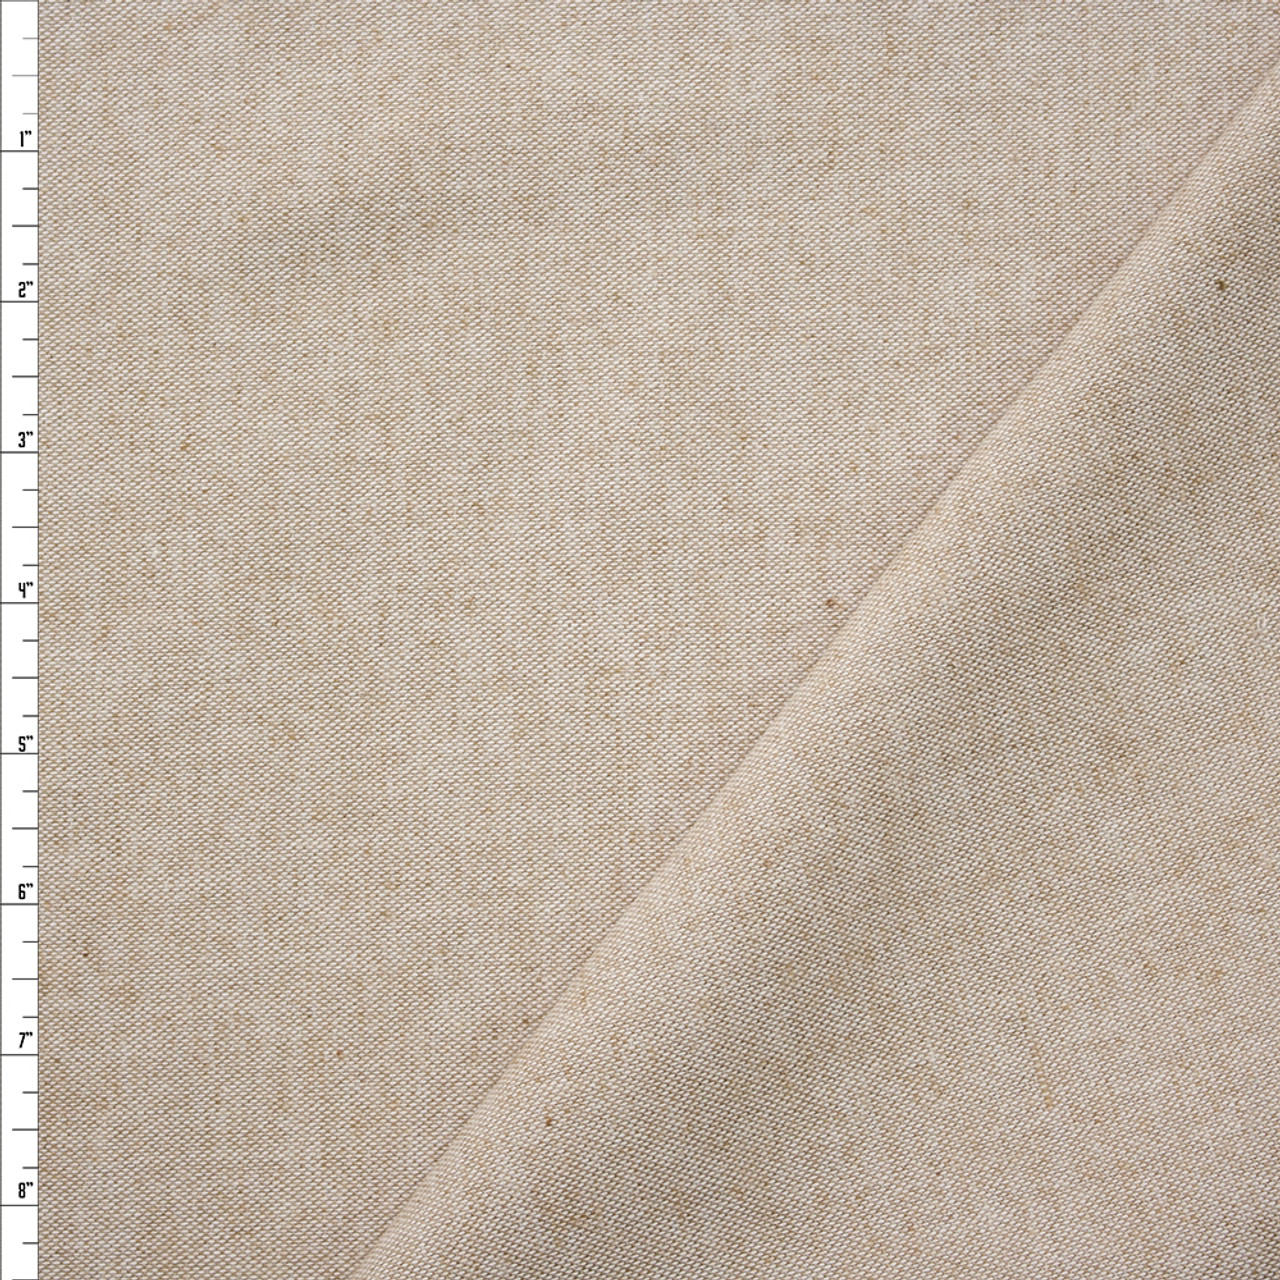 Cotton Canvas Fabric by the Yard